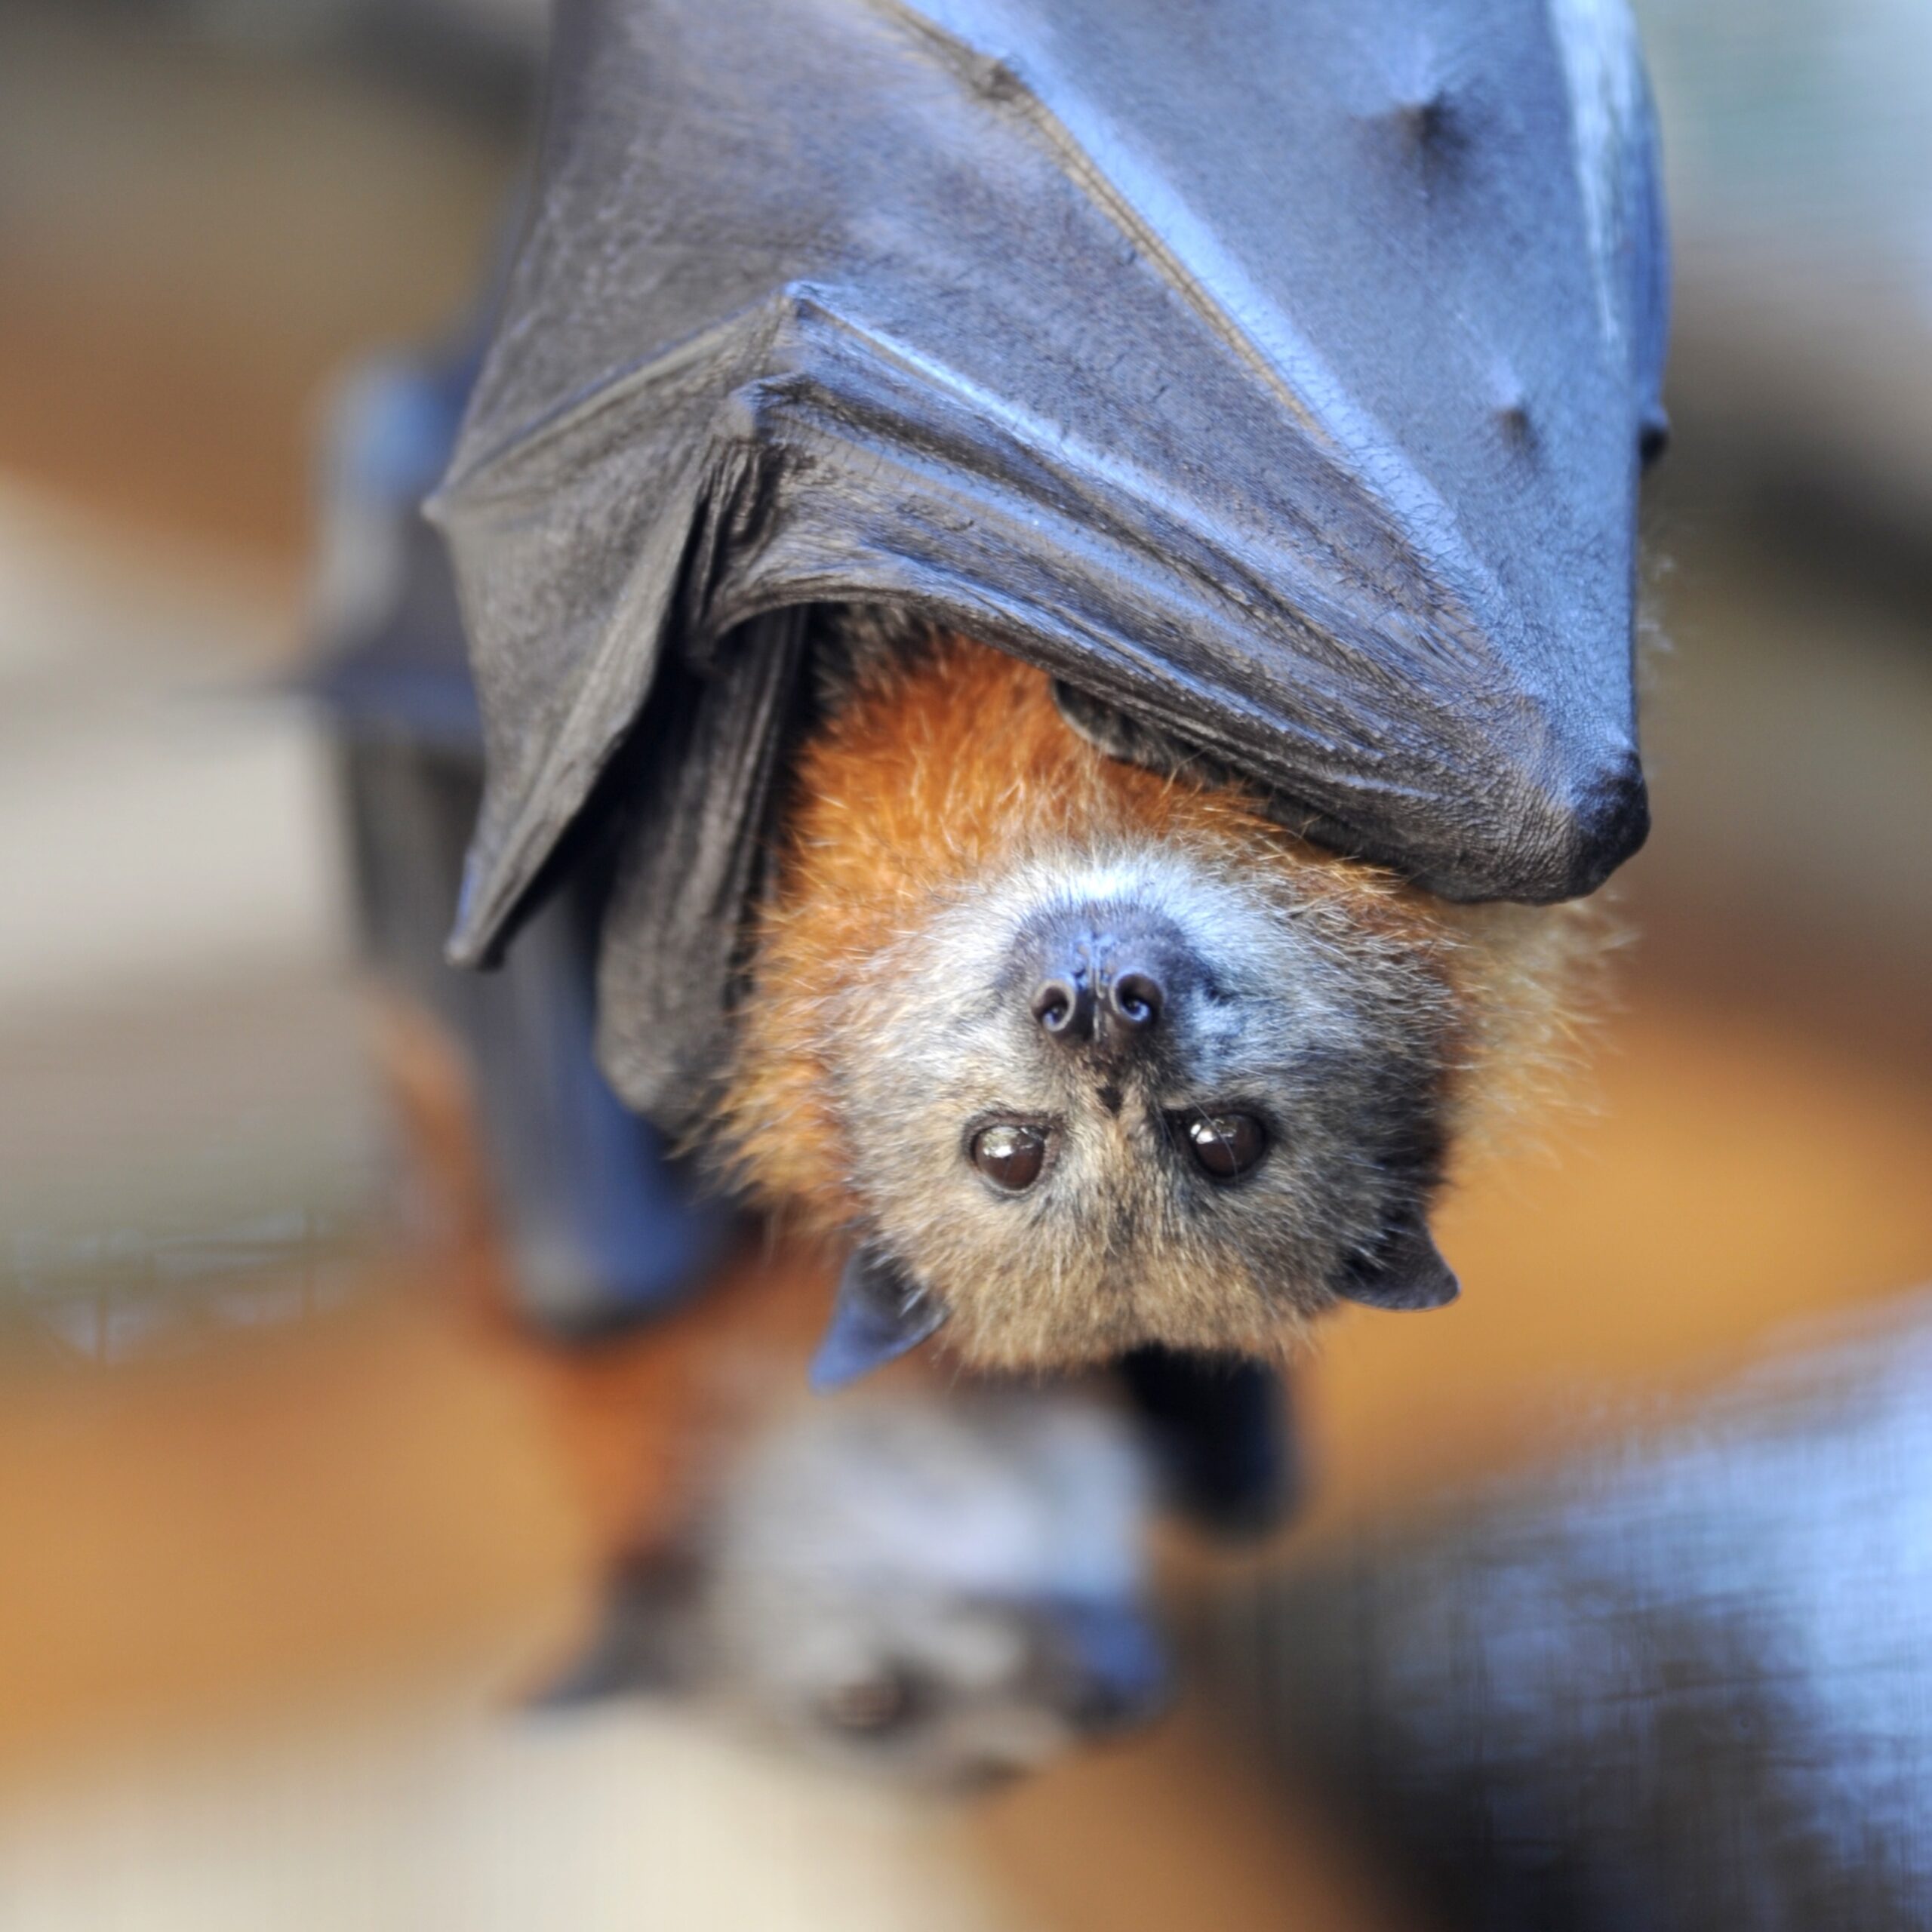 Debunking the Myth: Bats Are Not Blind